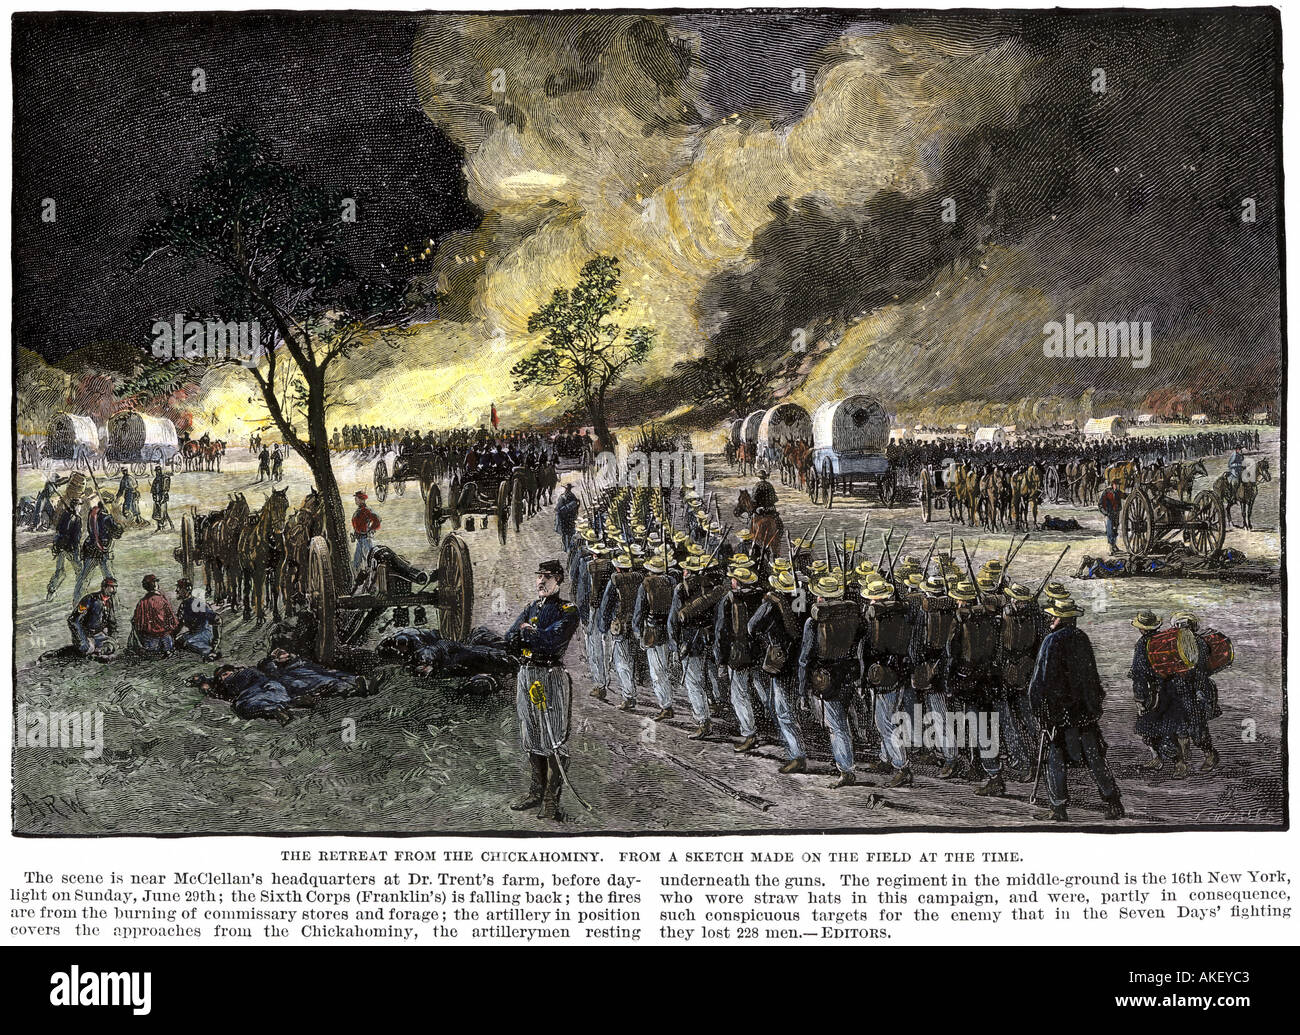 Army of the Potomac under General George B. McClellan retreating from the Chickahominy 1862, US Civil War. Hand-colored woodcut Stock Photo